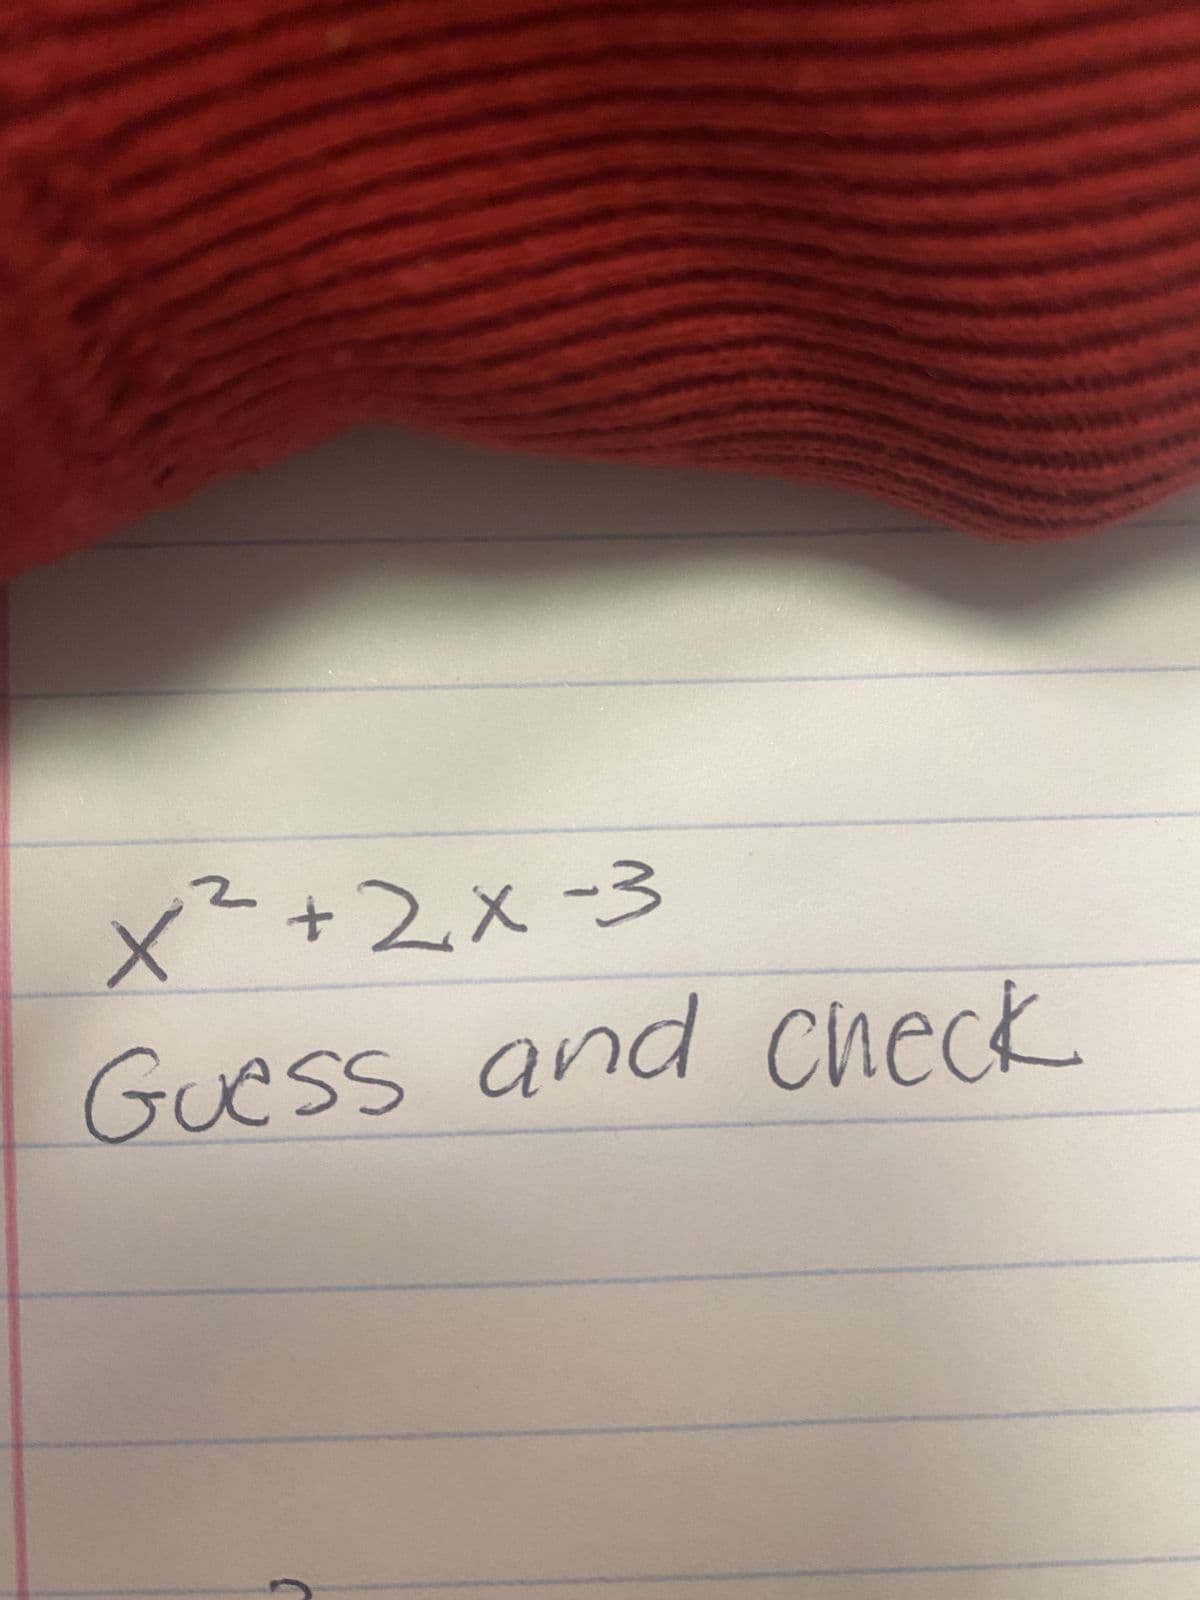 x²+2x-3
Guess and check